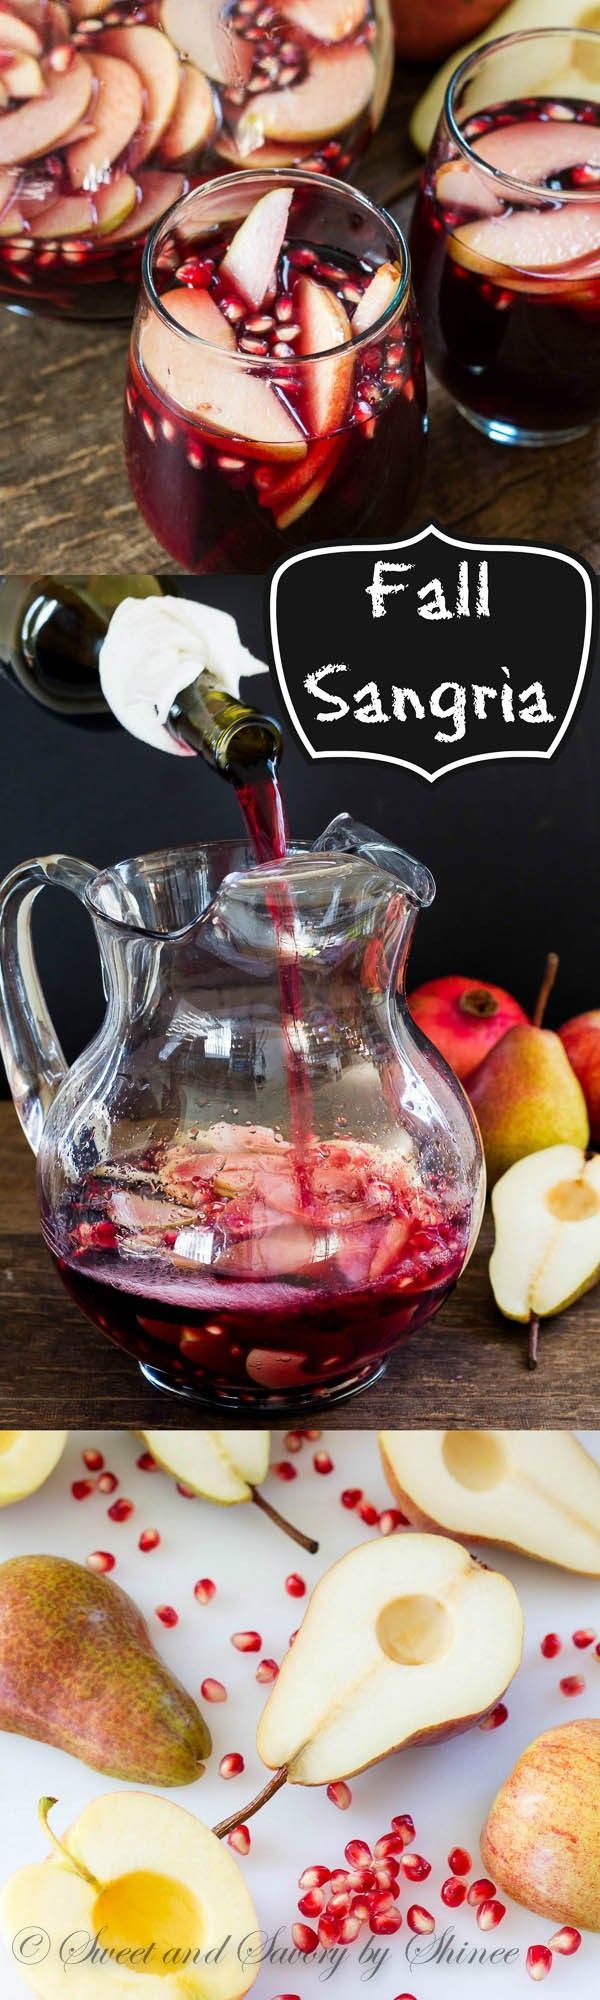 My fall sangria, filled with apples, pears and pomegranates, is absolutely delicious drink you can enj